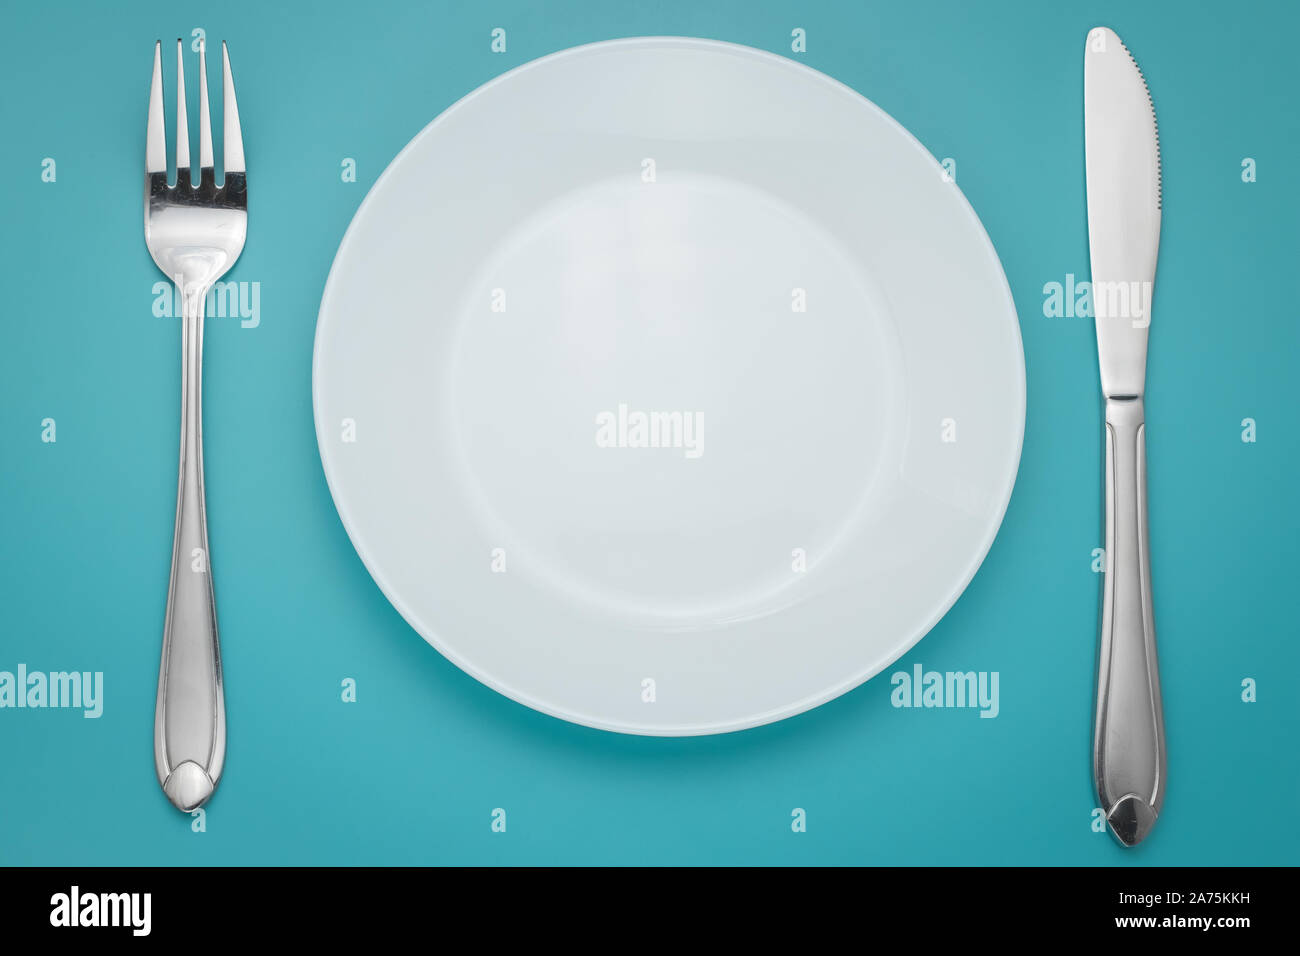 White empty plate with fork and knife on blue background. Turquoise backdrop. Laying, table appointments. Stock Photo